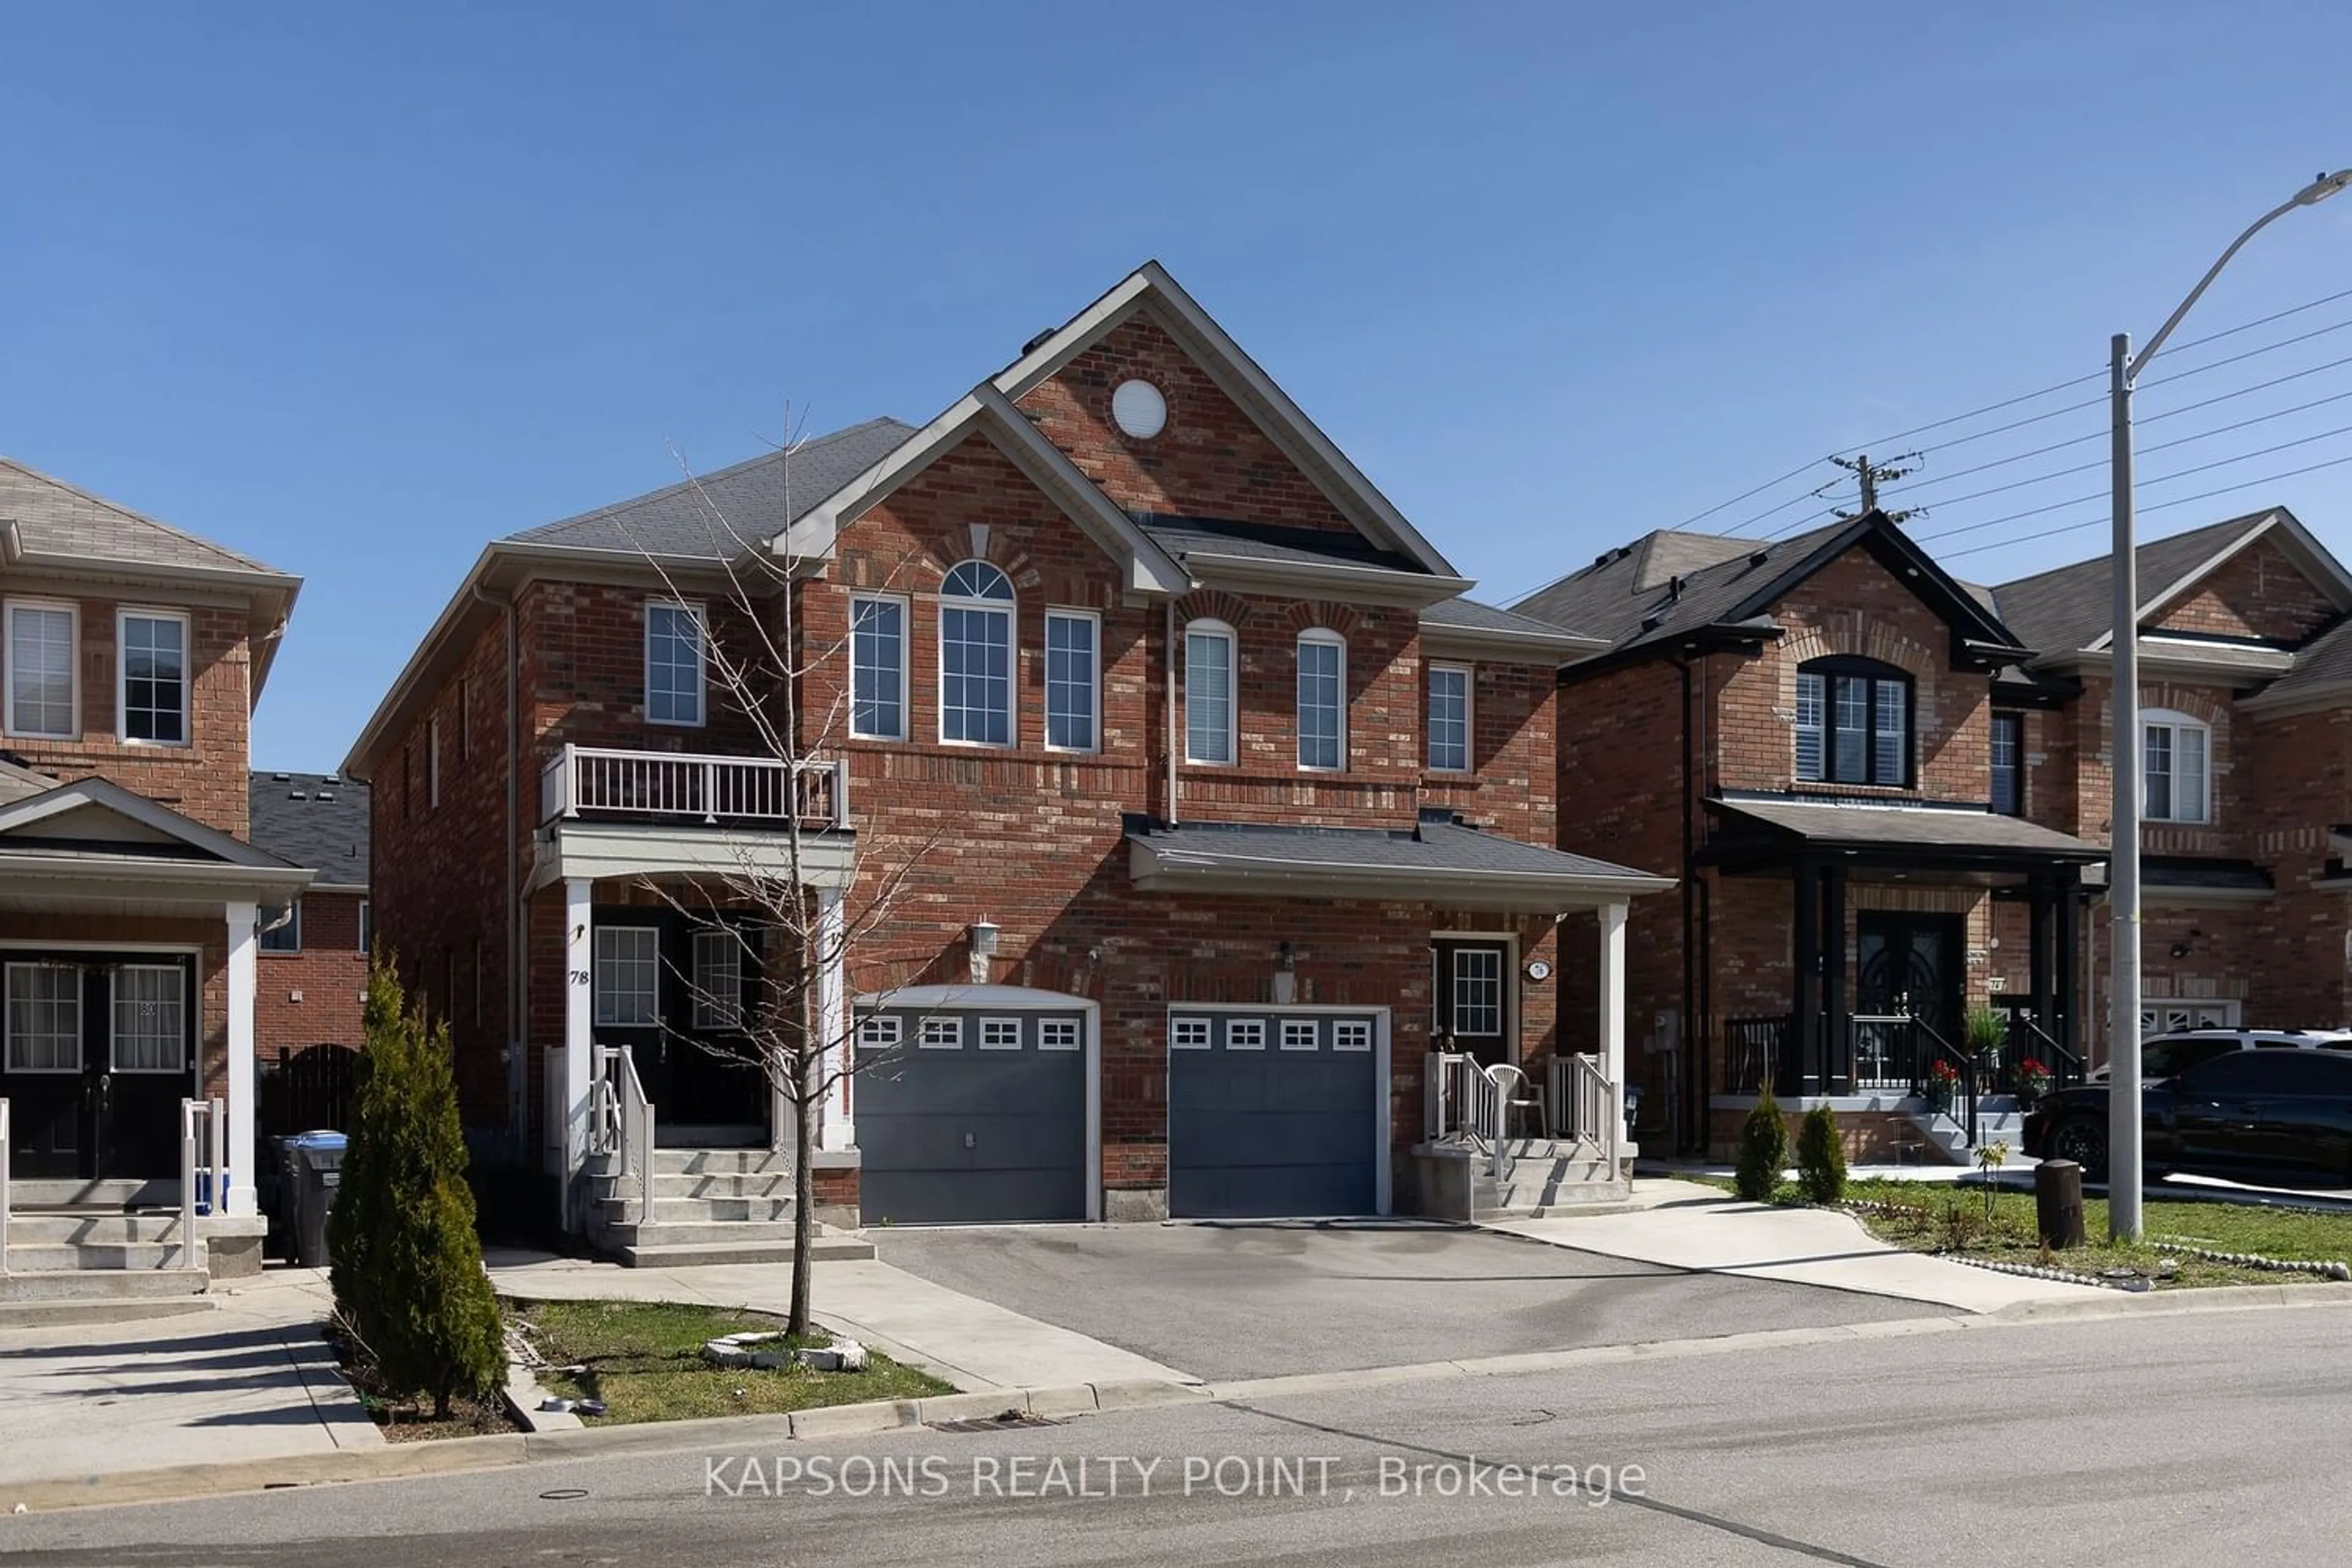 Home with brick exterior material for 78 Gulfbrook Circ, Brampton Ontario L6Z 0B6